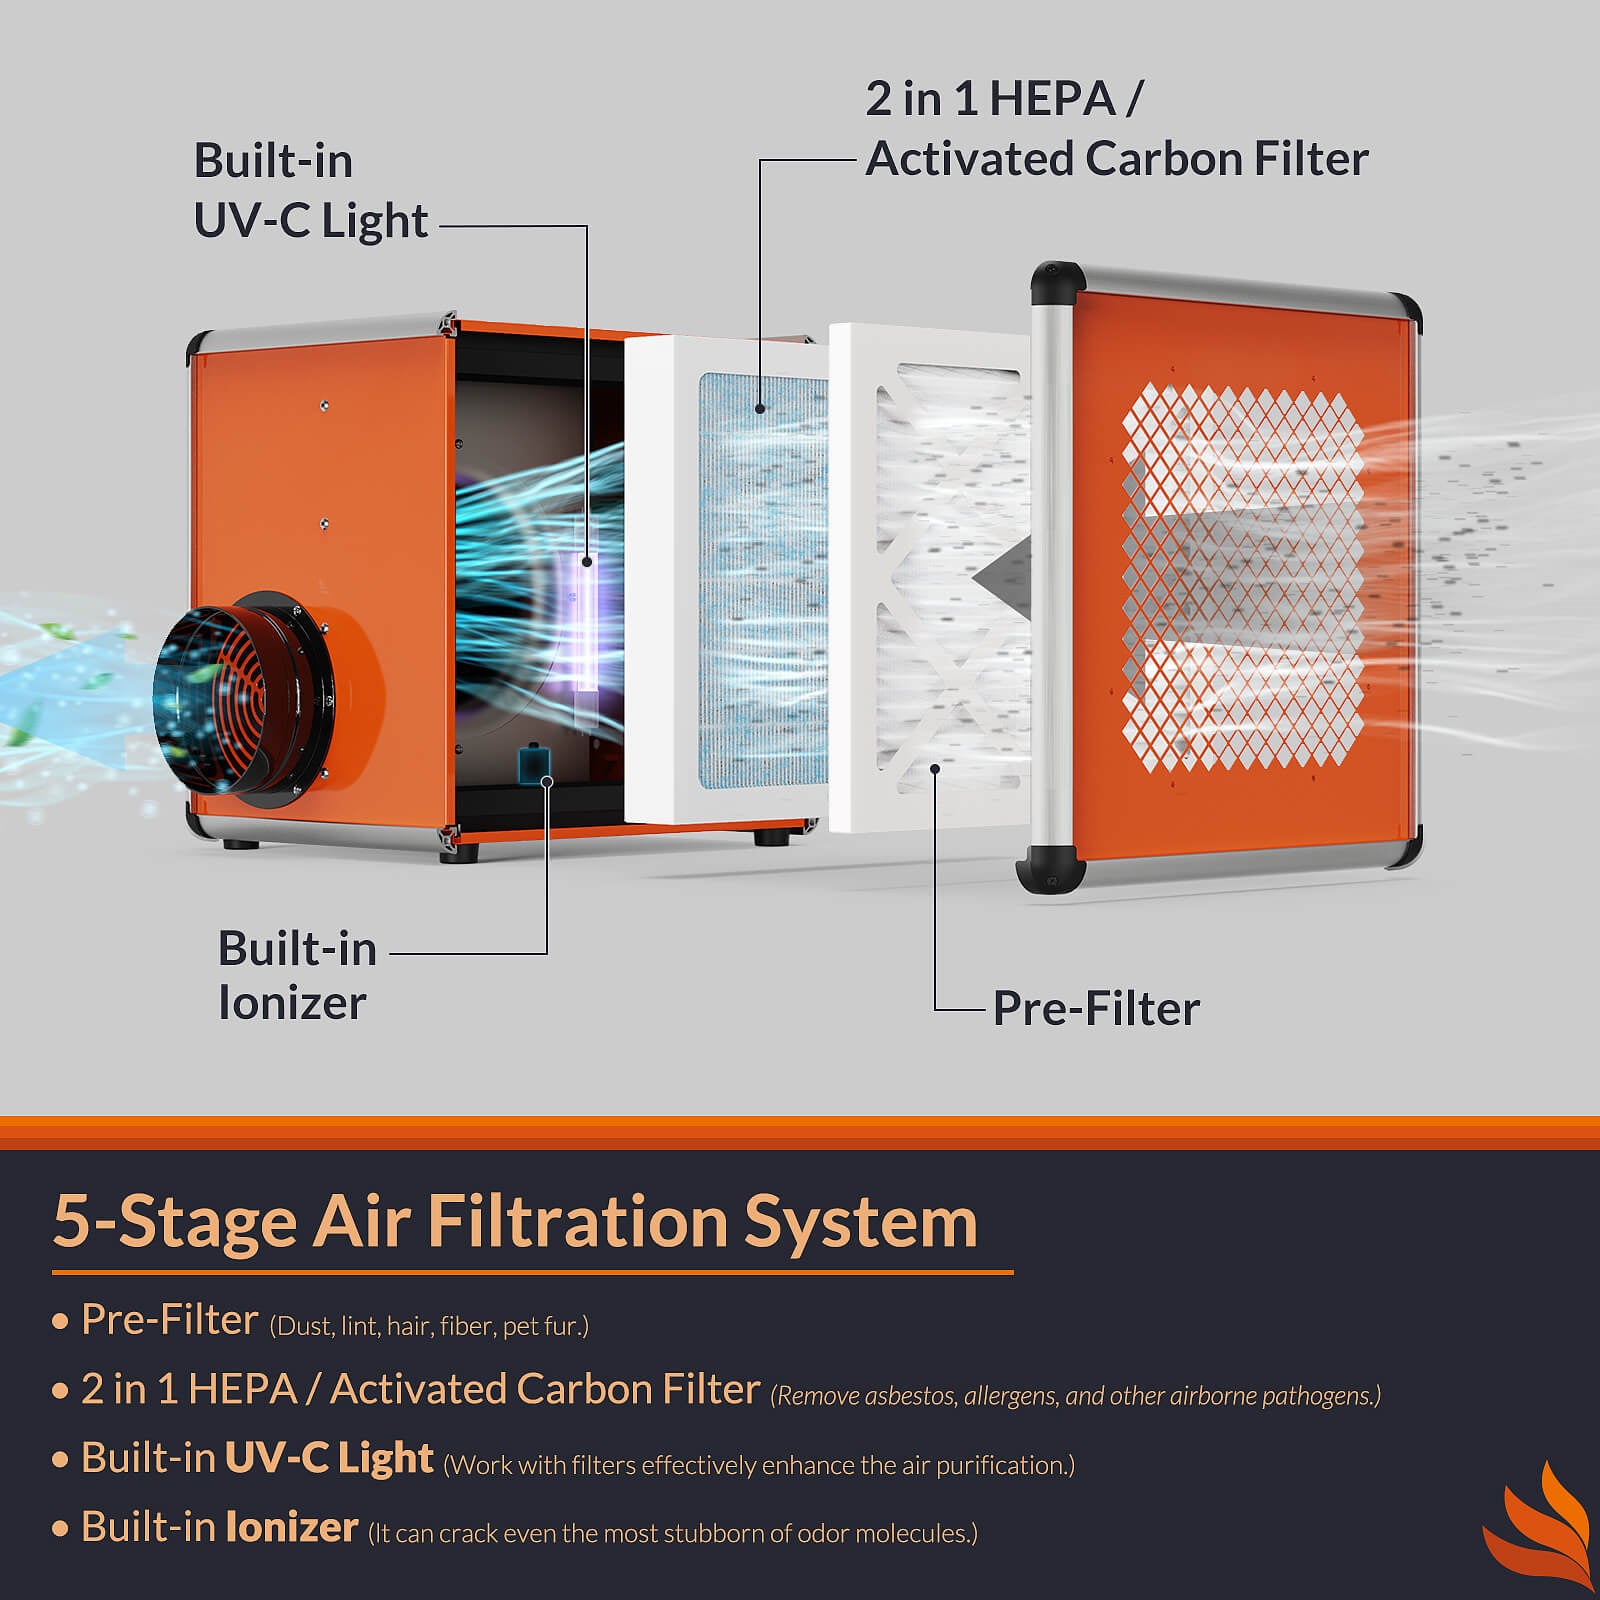 Purisystems Air Scrubber with 5-stage Filtration system, Negative Machine Air Scrubber, Built-in Ionizer and UV-C Light, Professional Water Damage Restoration for Air Cleaner | up to 600 CFM AlorAir